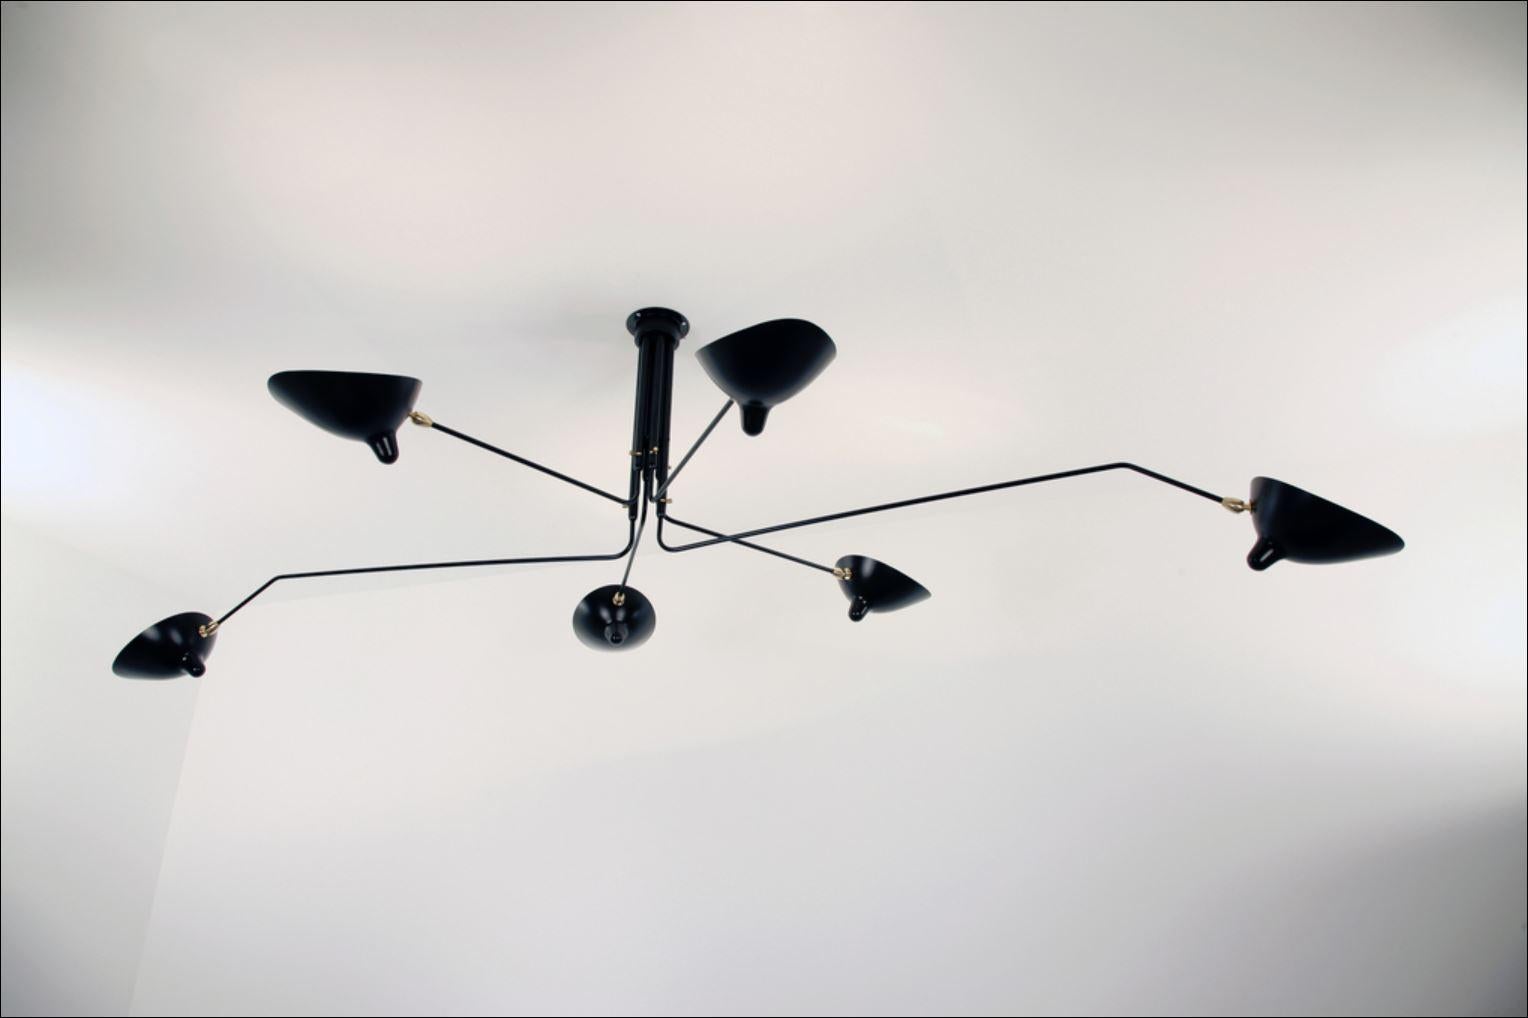 Impressively large, this six arm ceiling lamp is a Mouille classic. Tilting and rotating heads with rotating arms of 31 and 54 inches make this fixture a truly spectacular statement in a large room.

Brass swivels connect the shades. The arms have